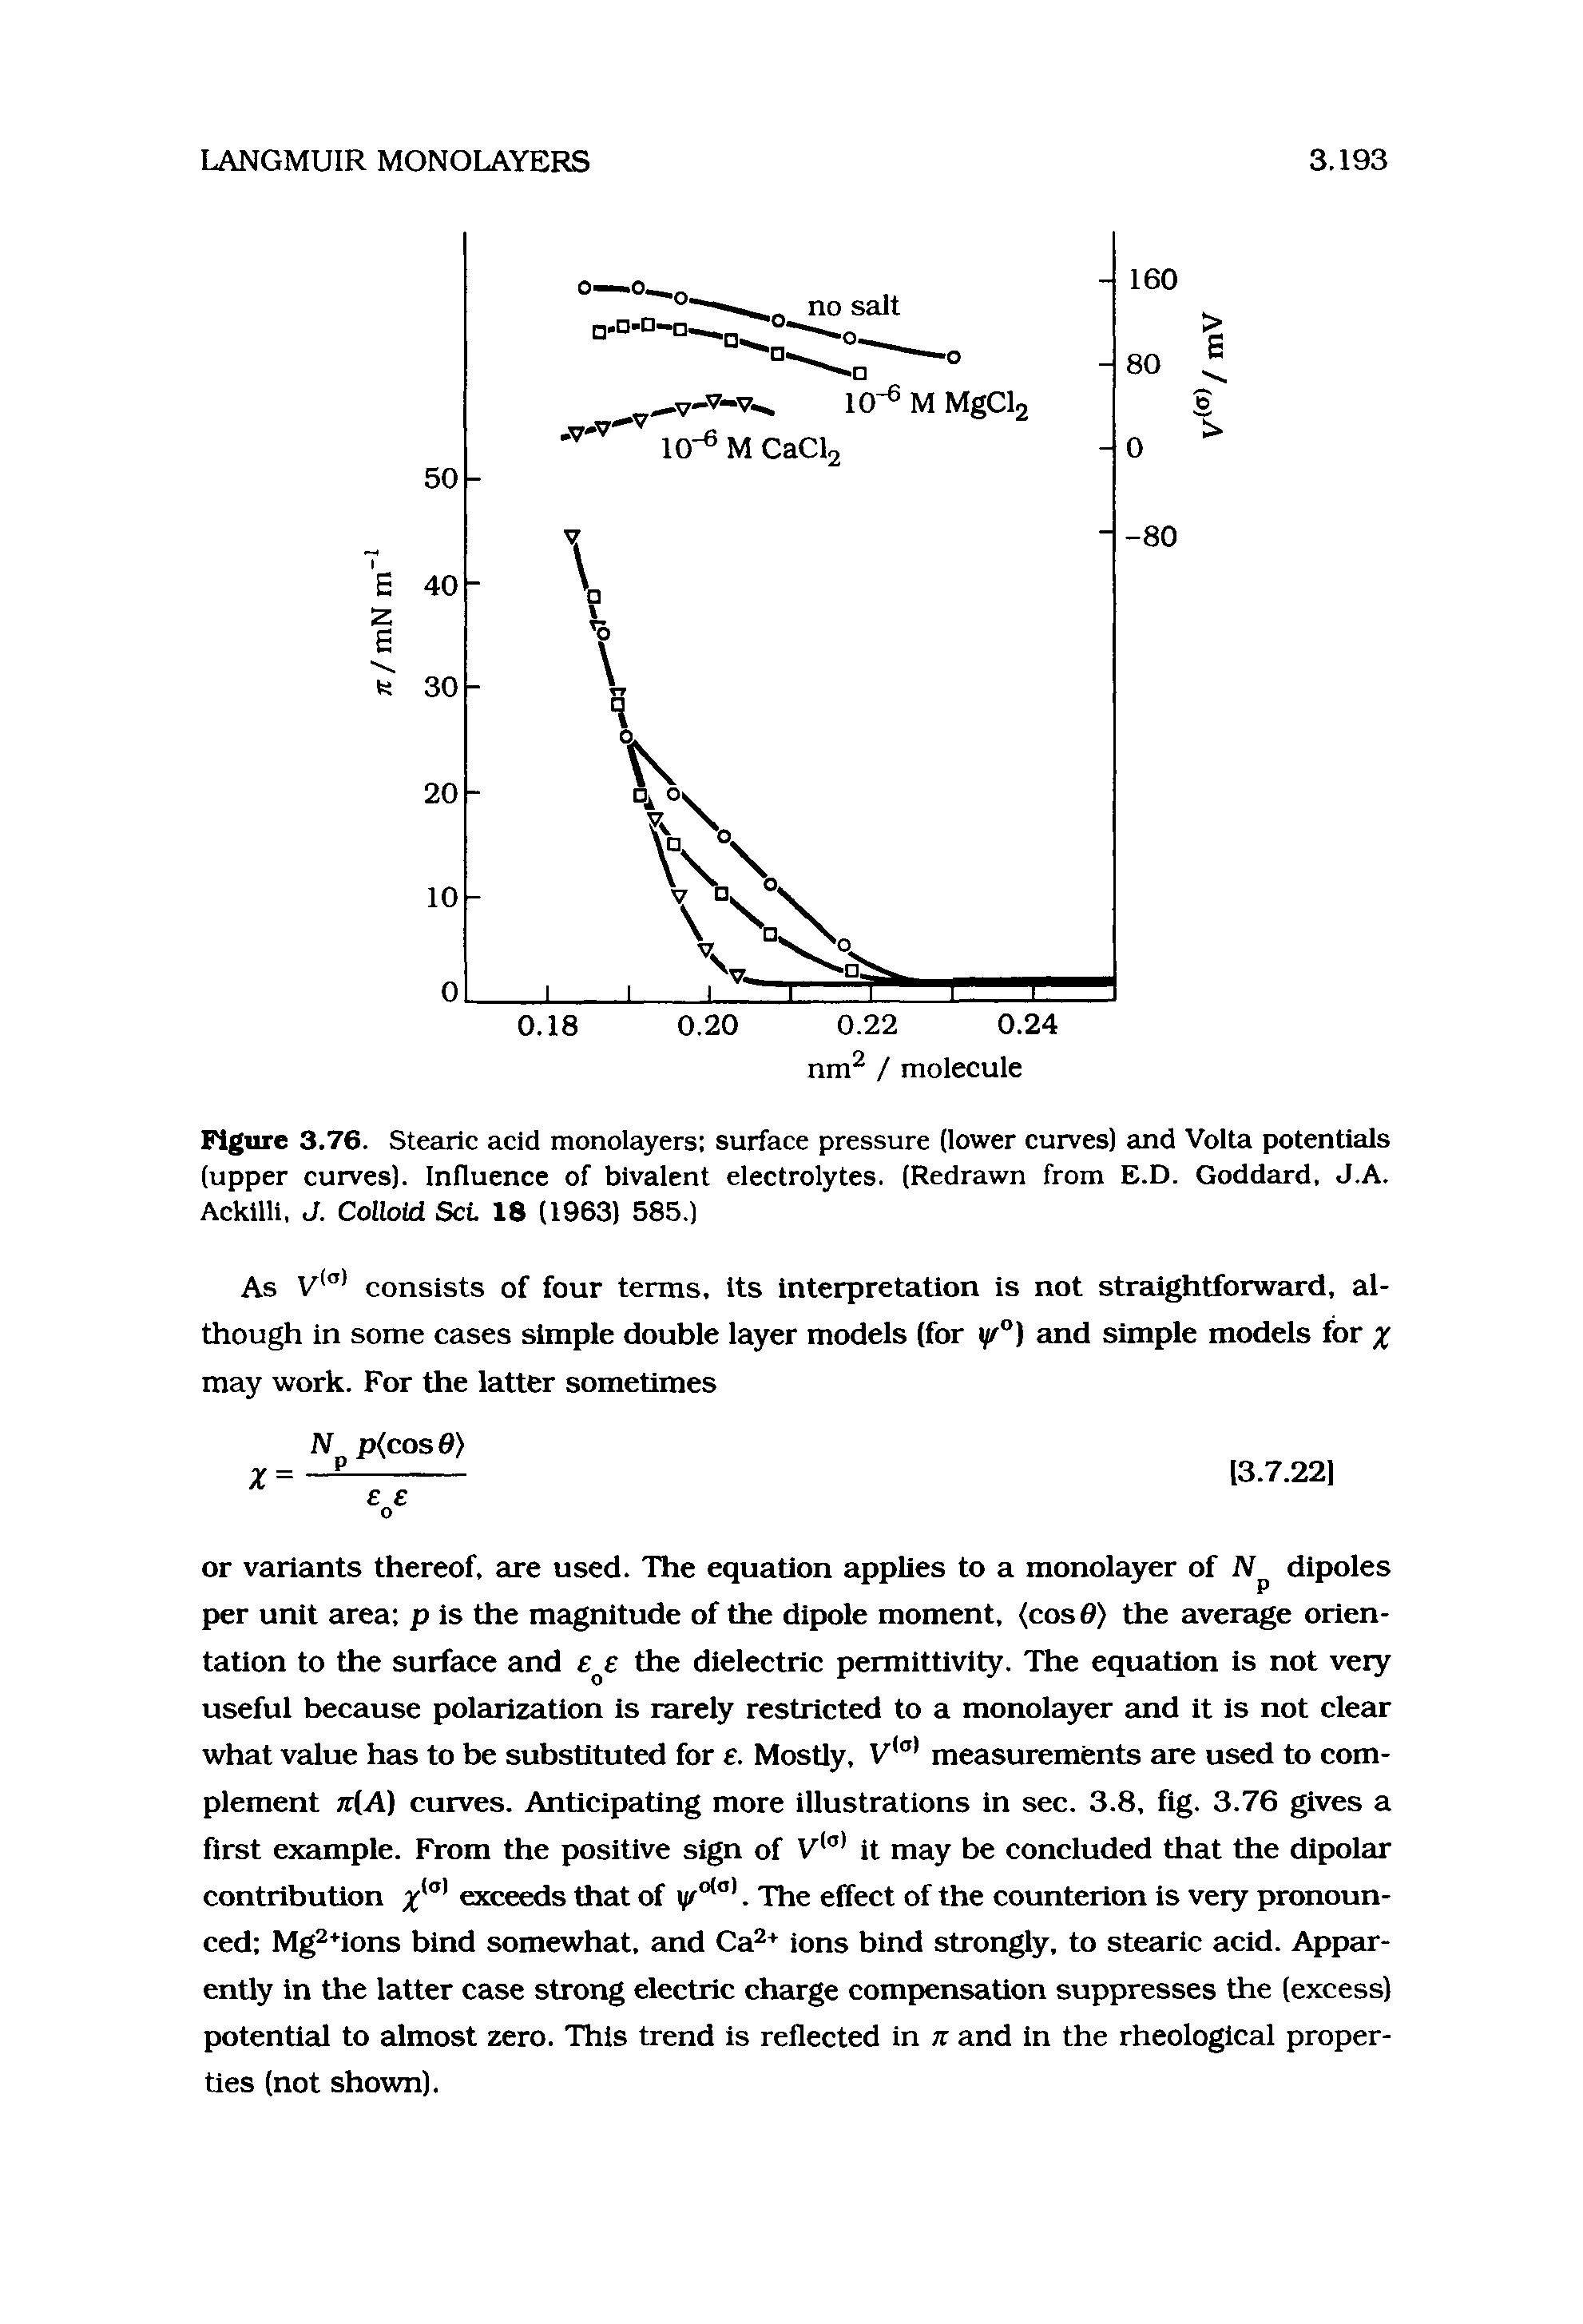 Figure 3.76. Stearic acid monolayers surface pressure (lower curves) and Volta potentials (upper curves). Influence of bivalent electrolytes. (Redrawn from E.D. Goddard, J.A. Ackilli, J. Colloid Set 18 (1963) 585.)...